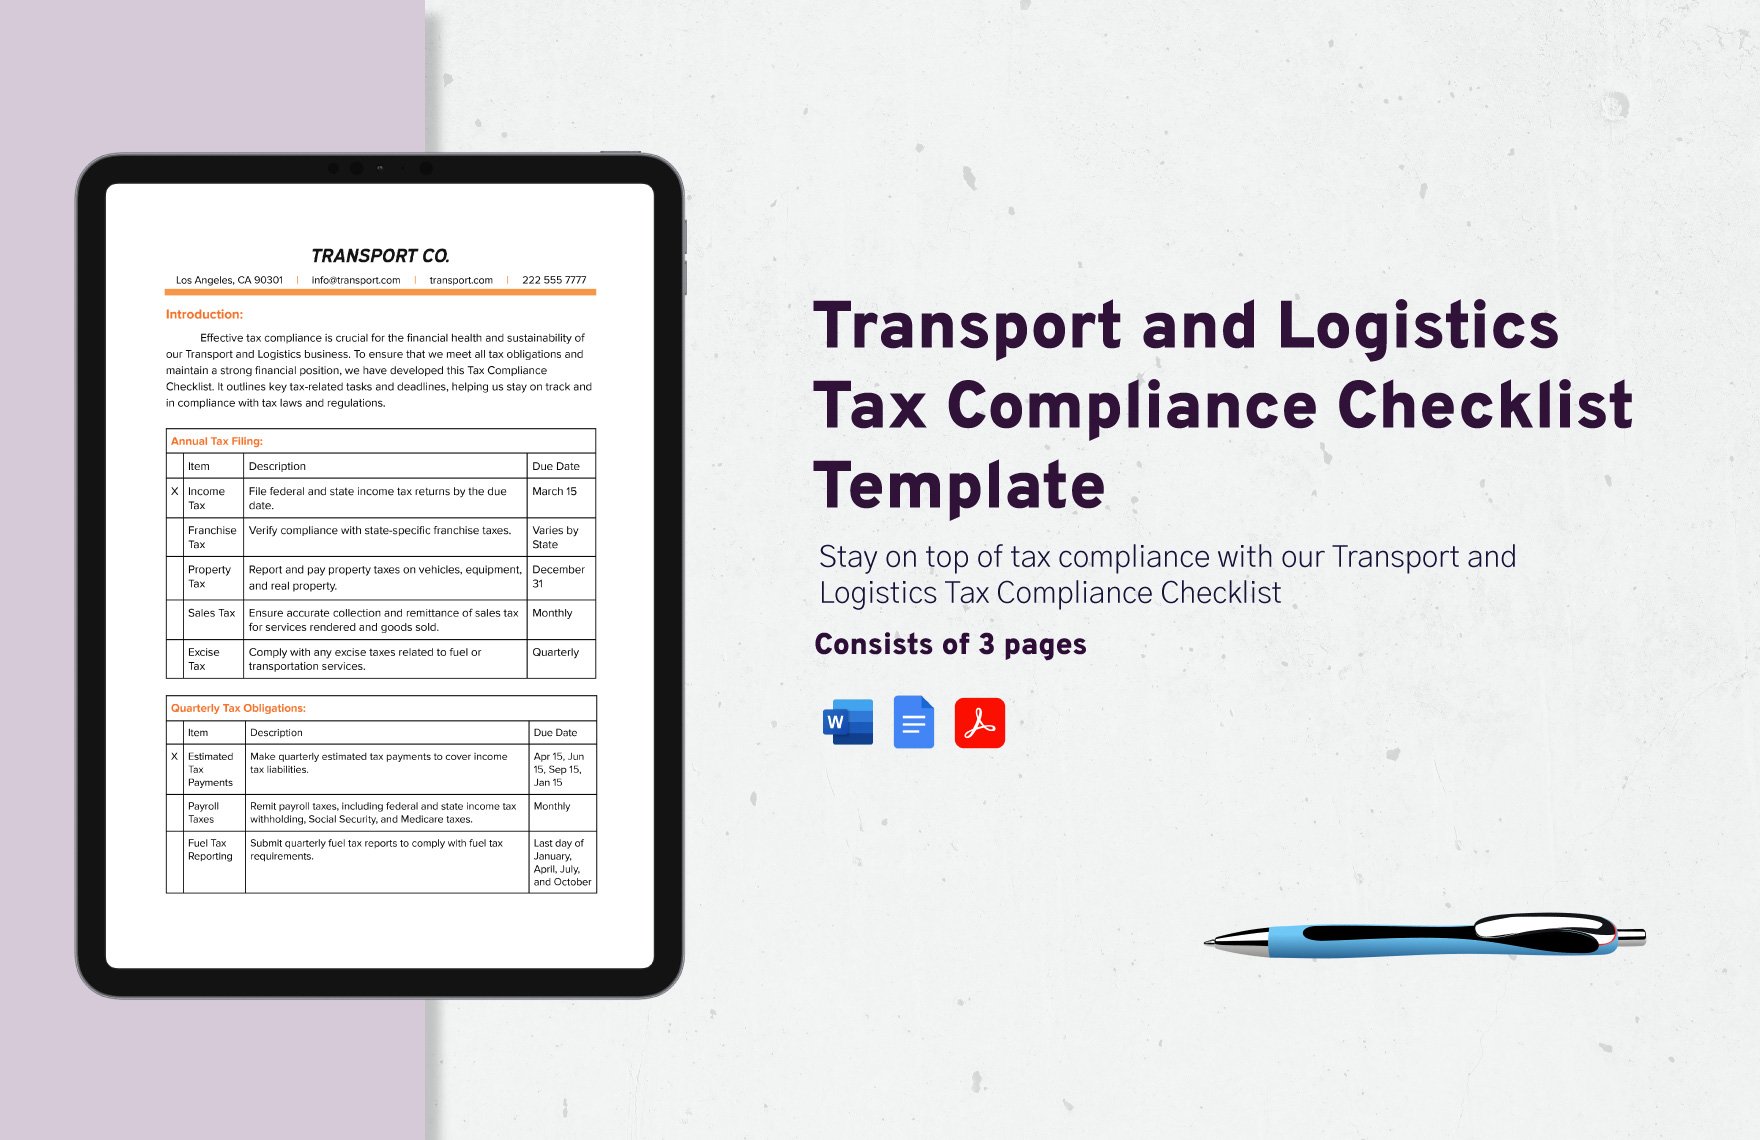 Transport and Logistics Tax Compliance Checklist Template in Word, Google Docs, PDF